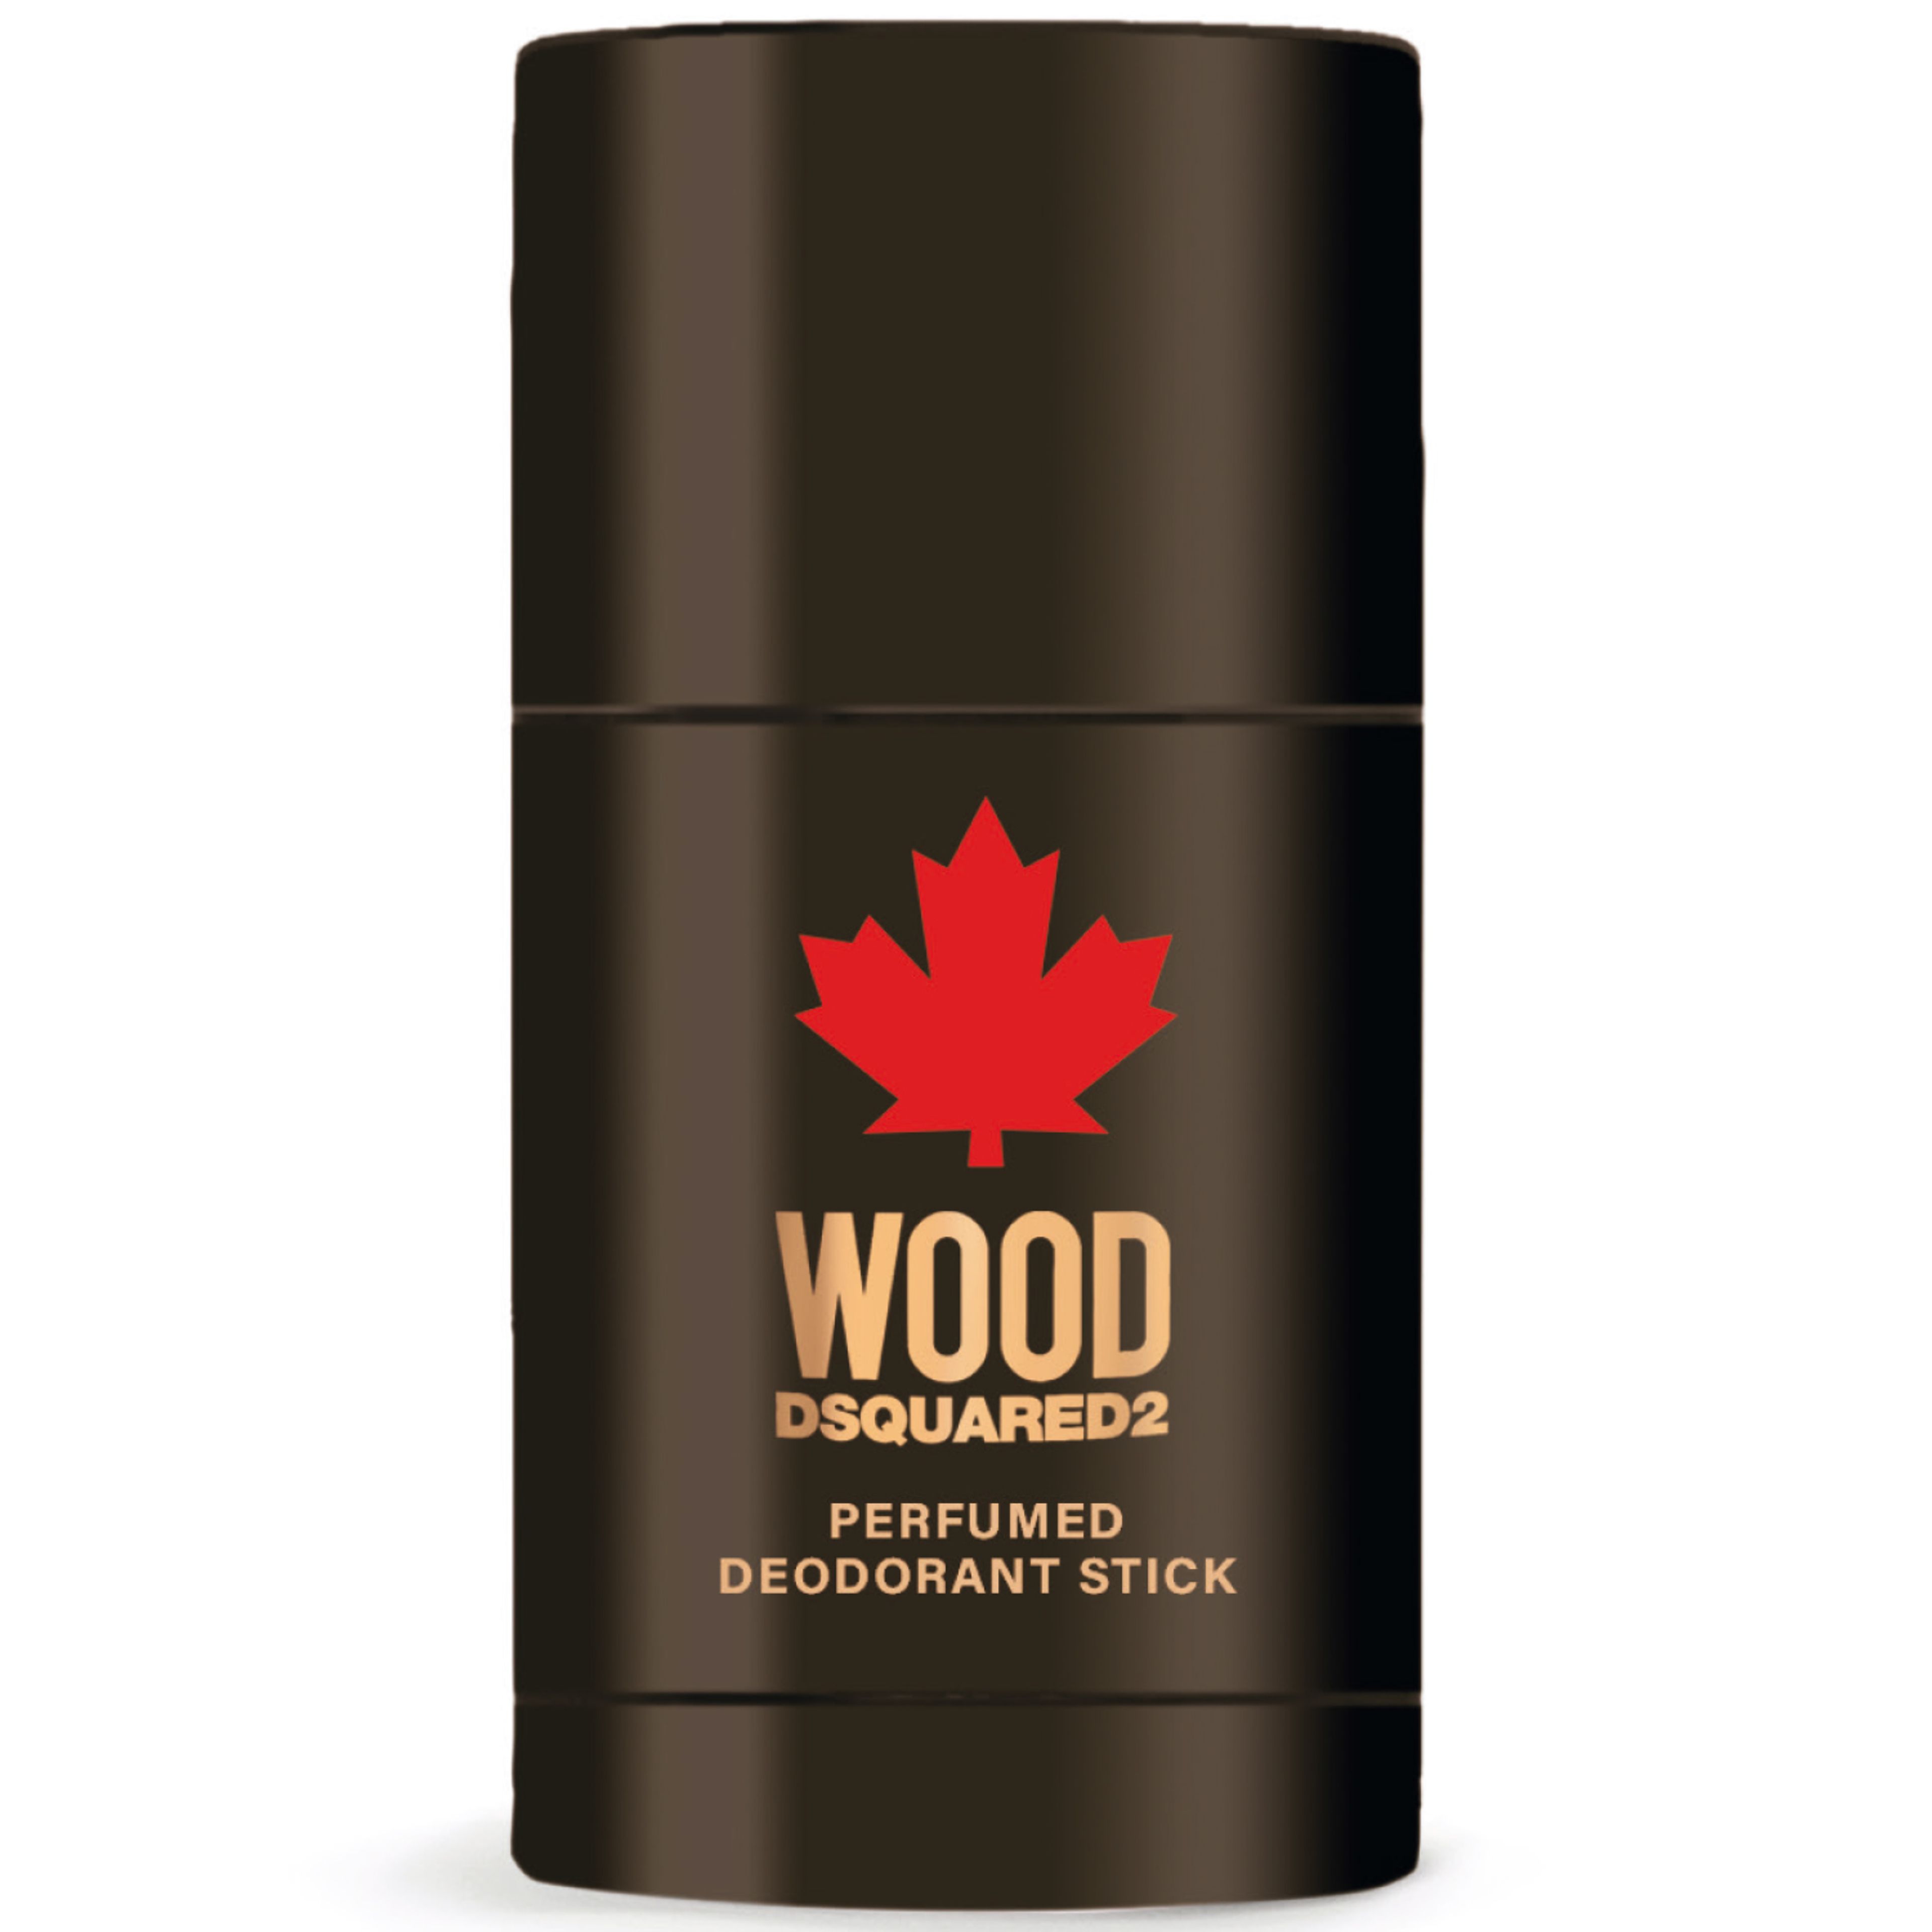 Dsquared2 Wood Pour Homme Perfumed Deodorant Stick 1